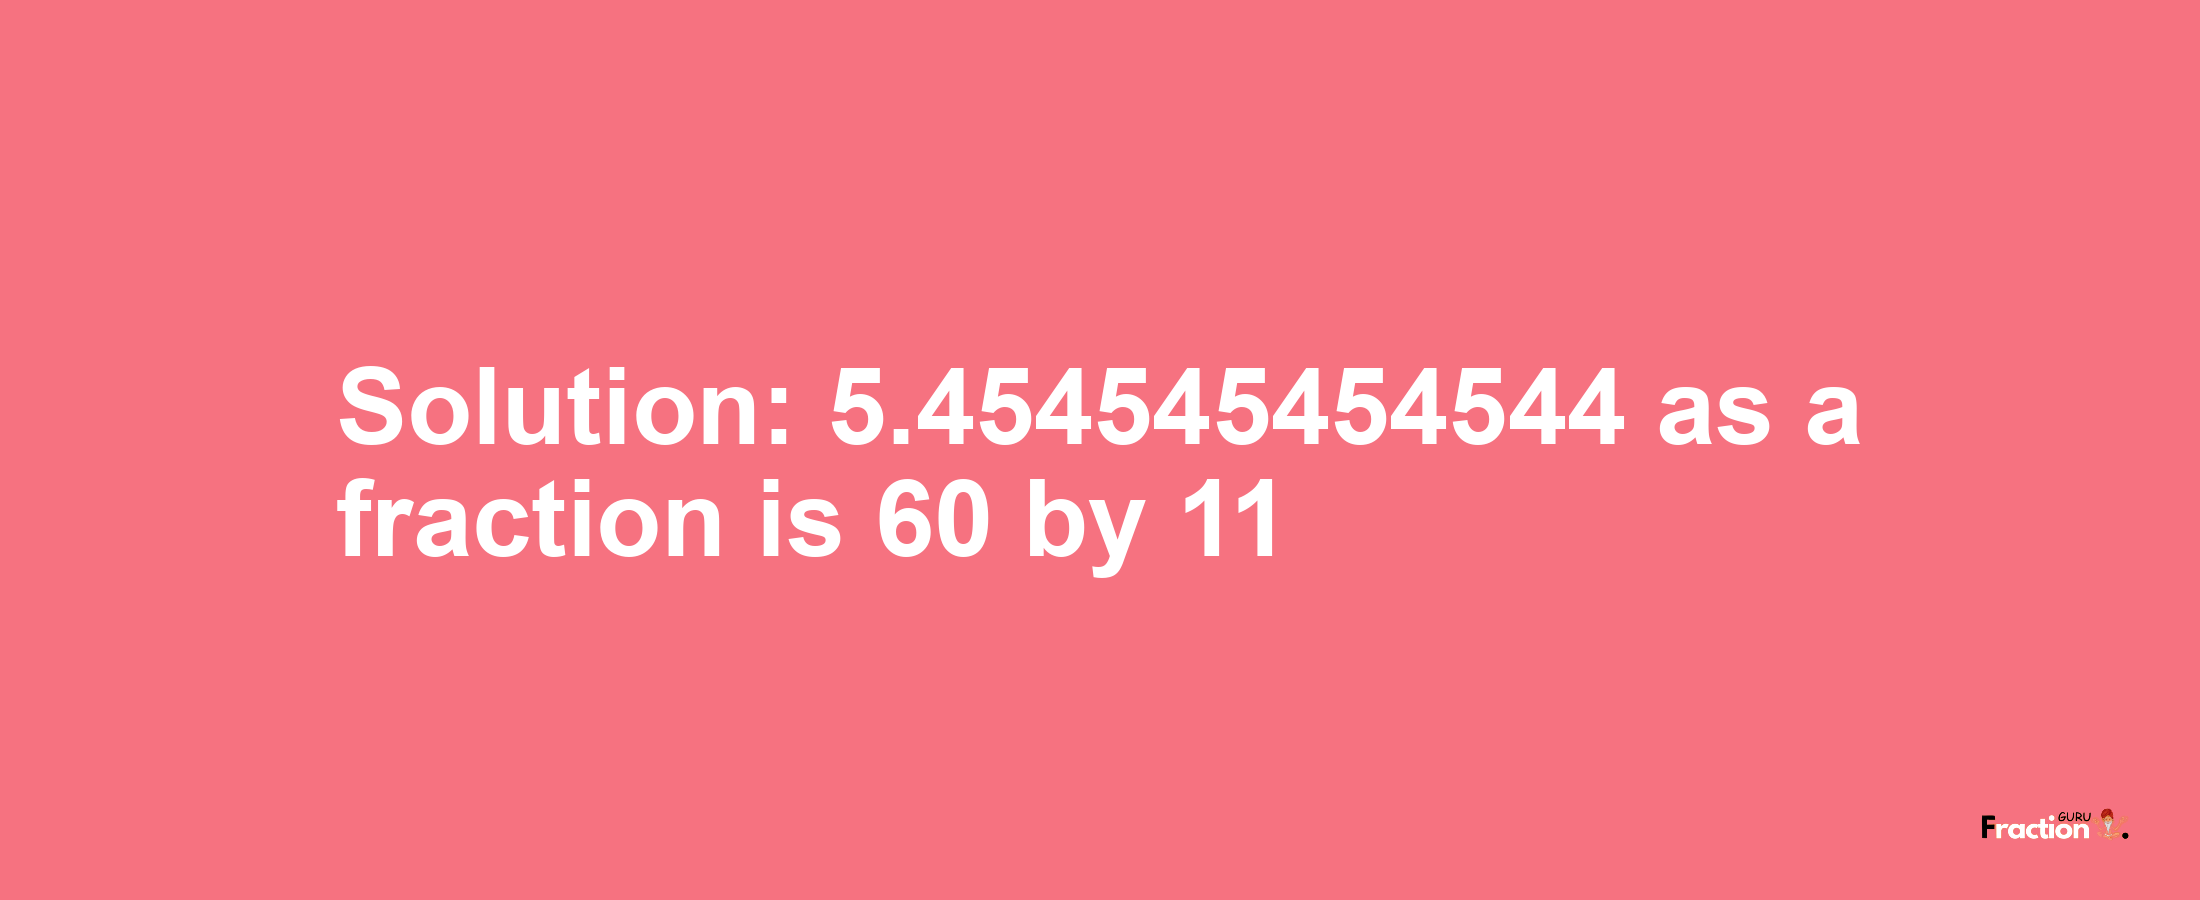 Solution:5.454545454544 as a fraction is 60/11